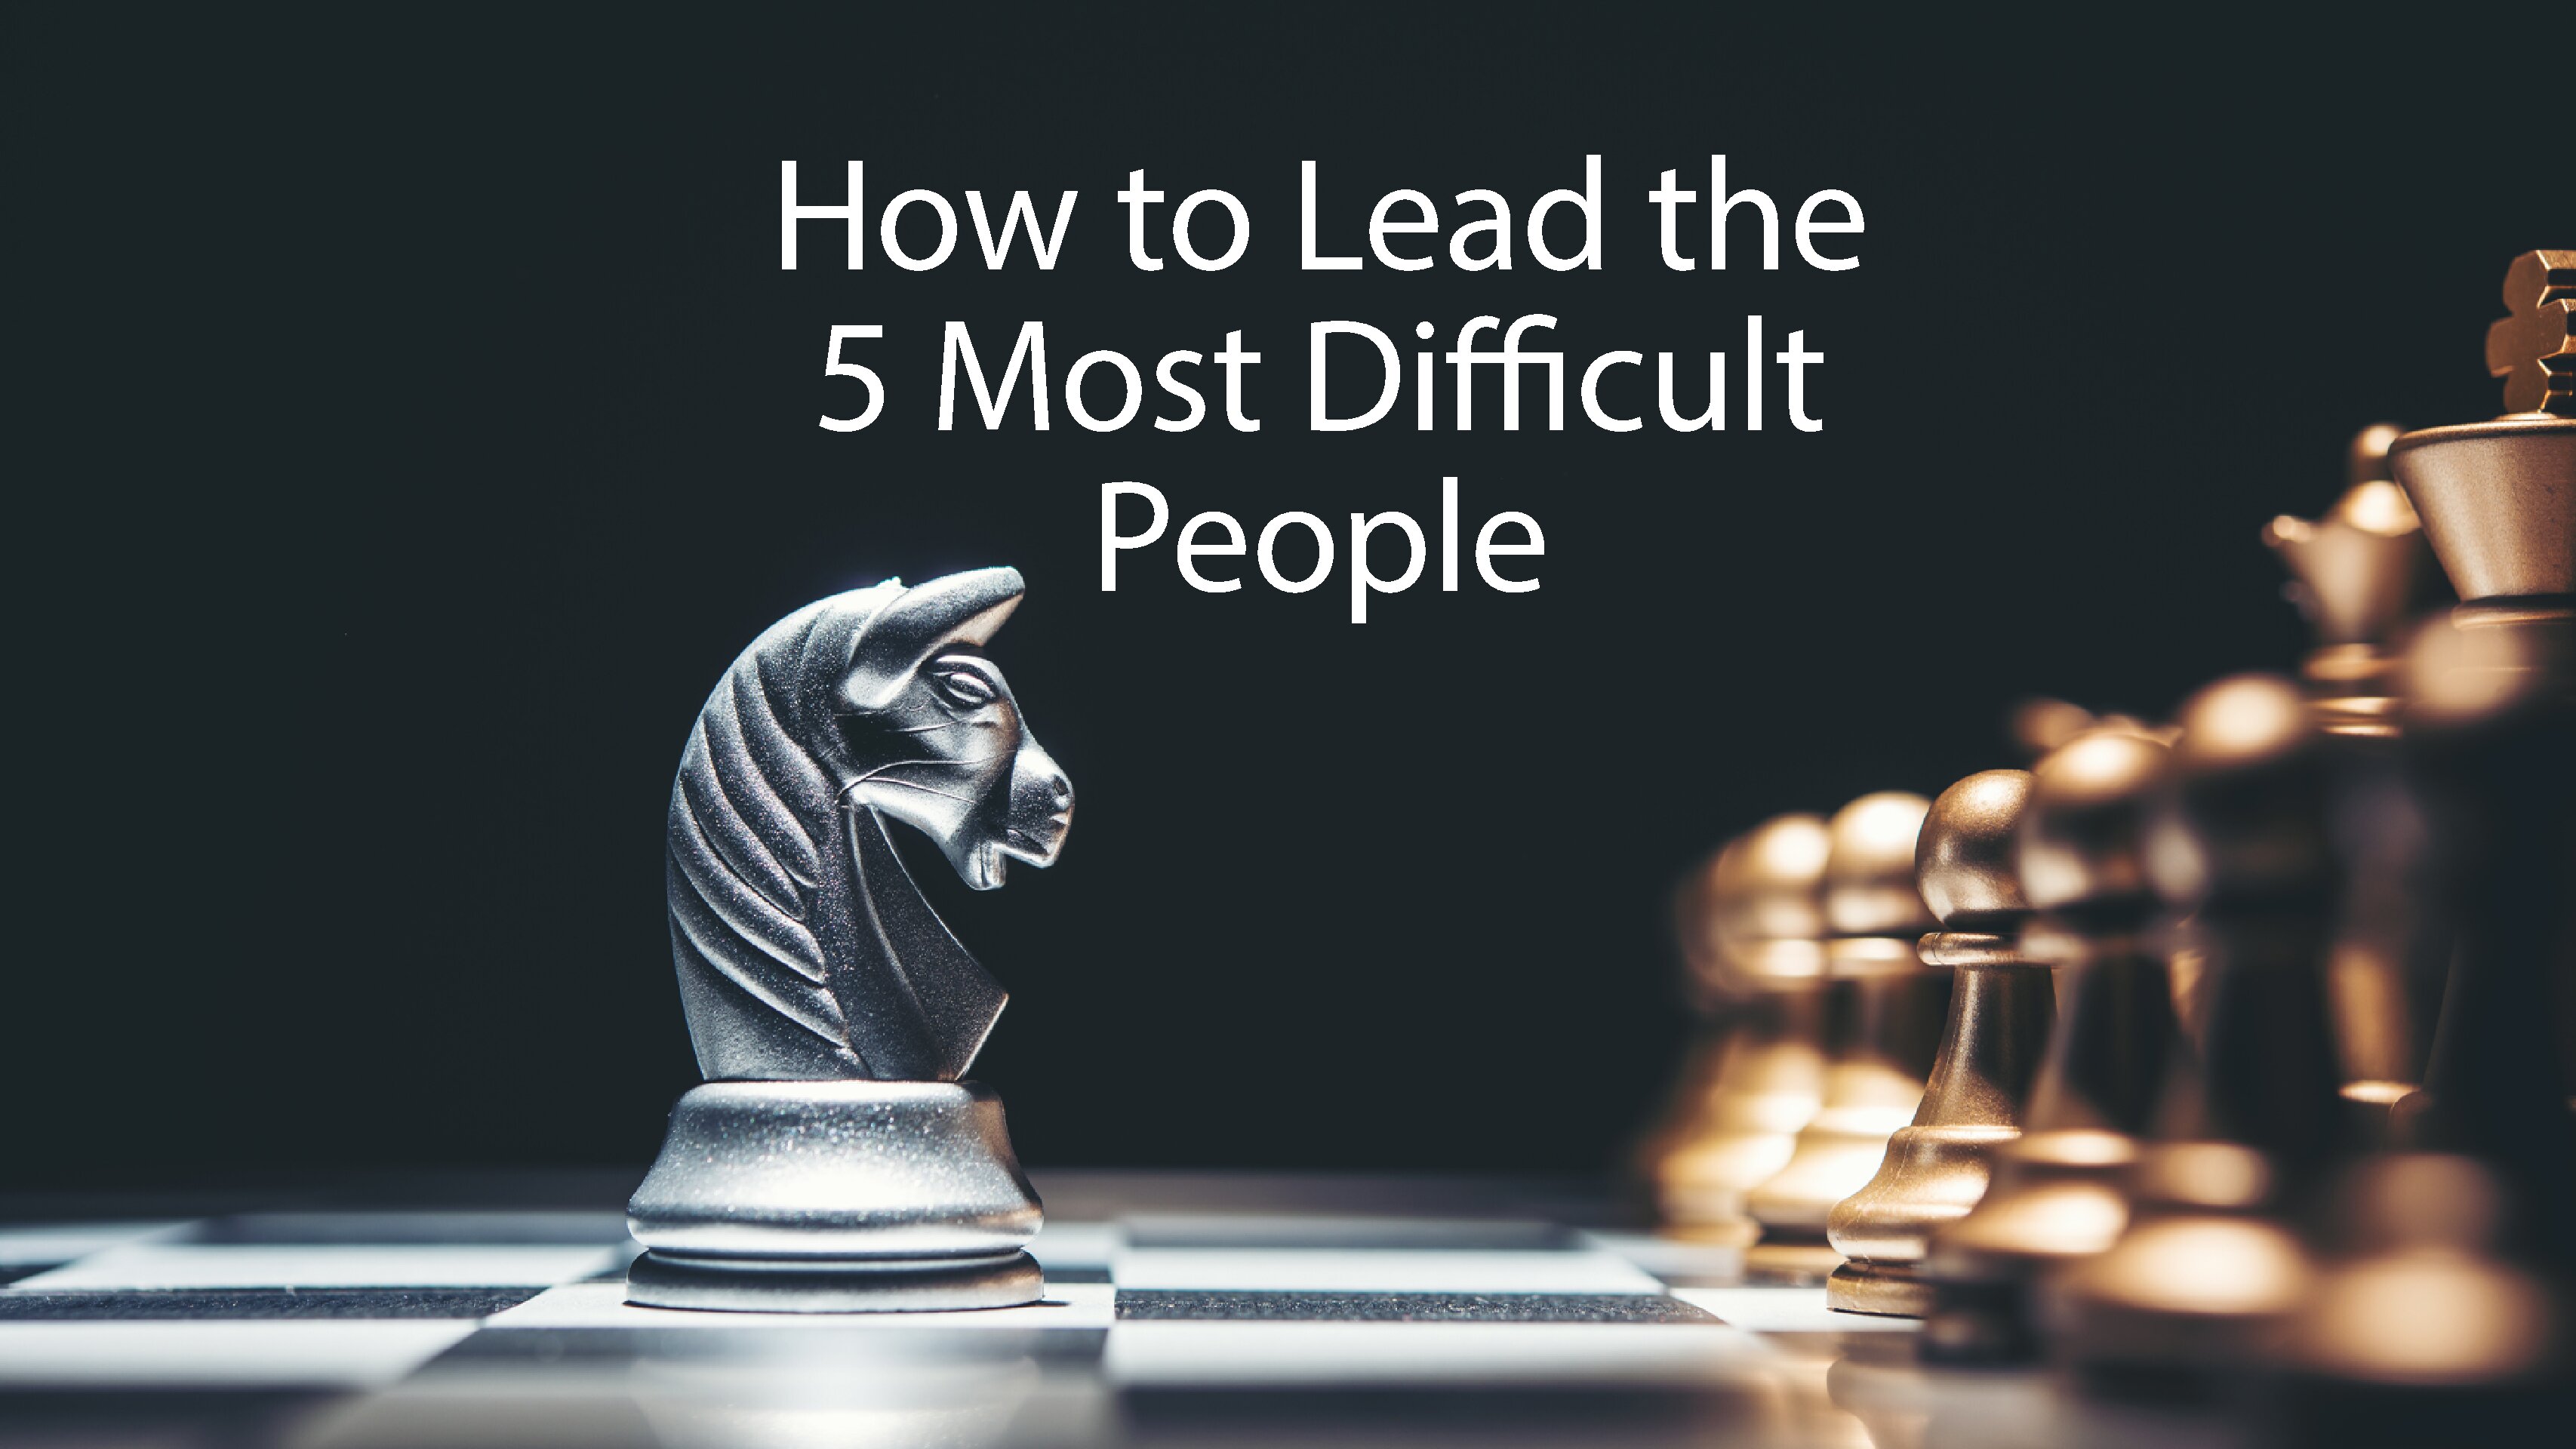 How to Lead the 5 Most Difficult People